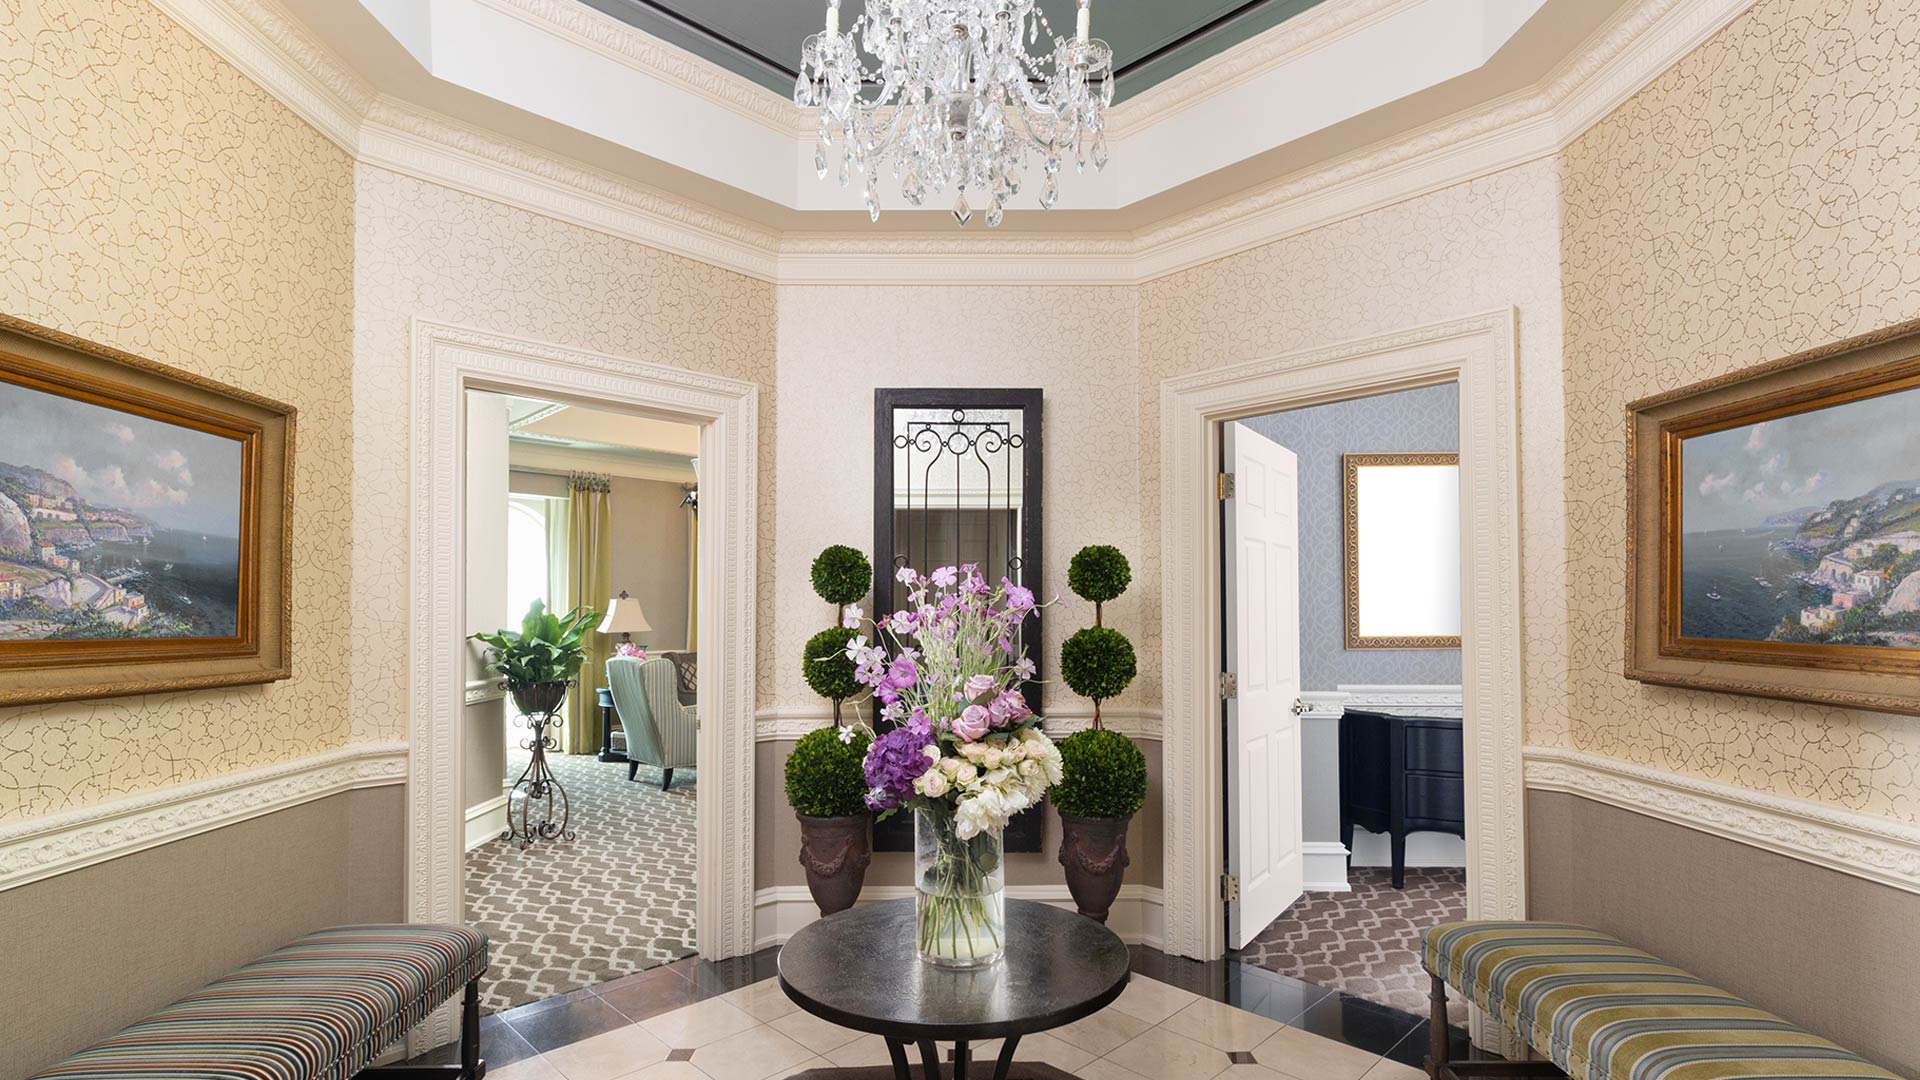 interior shot of The Chateau's presidential suite foyer. There is a round table in the center with flowers. on either side is a door leading to another room.